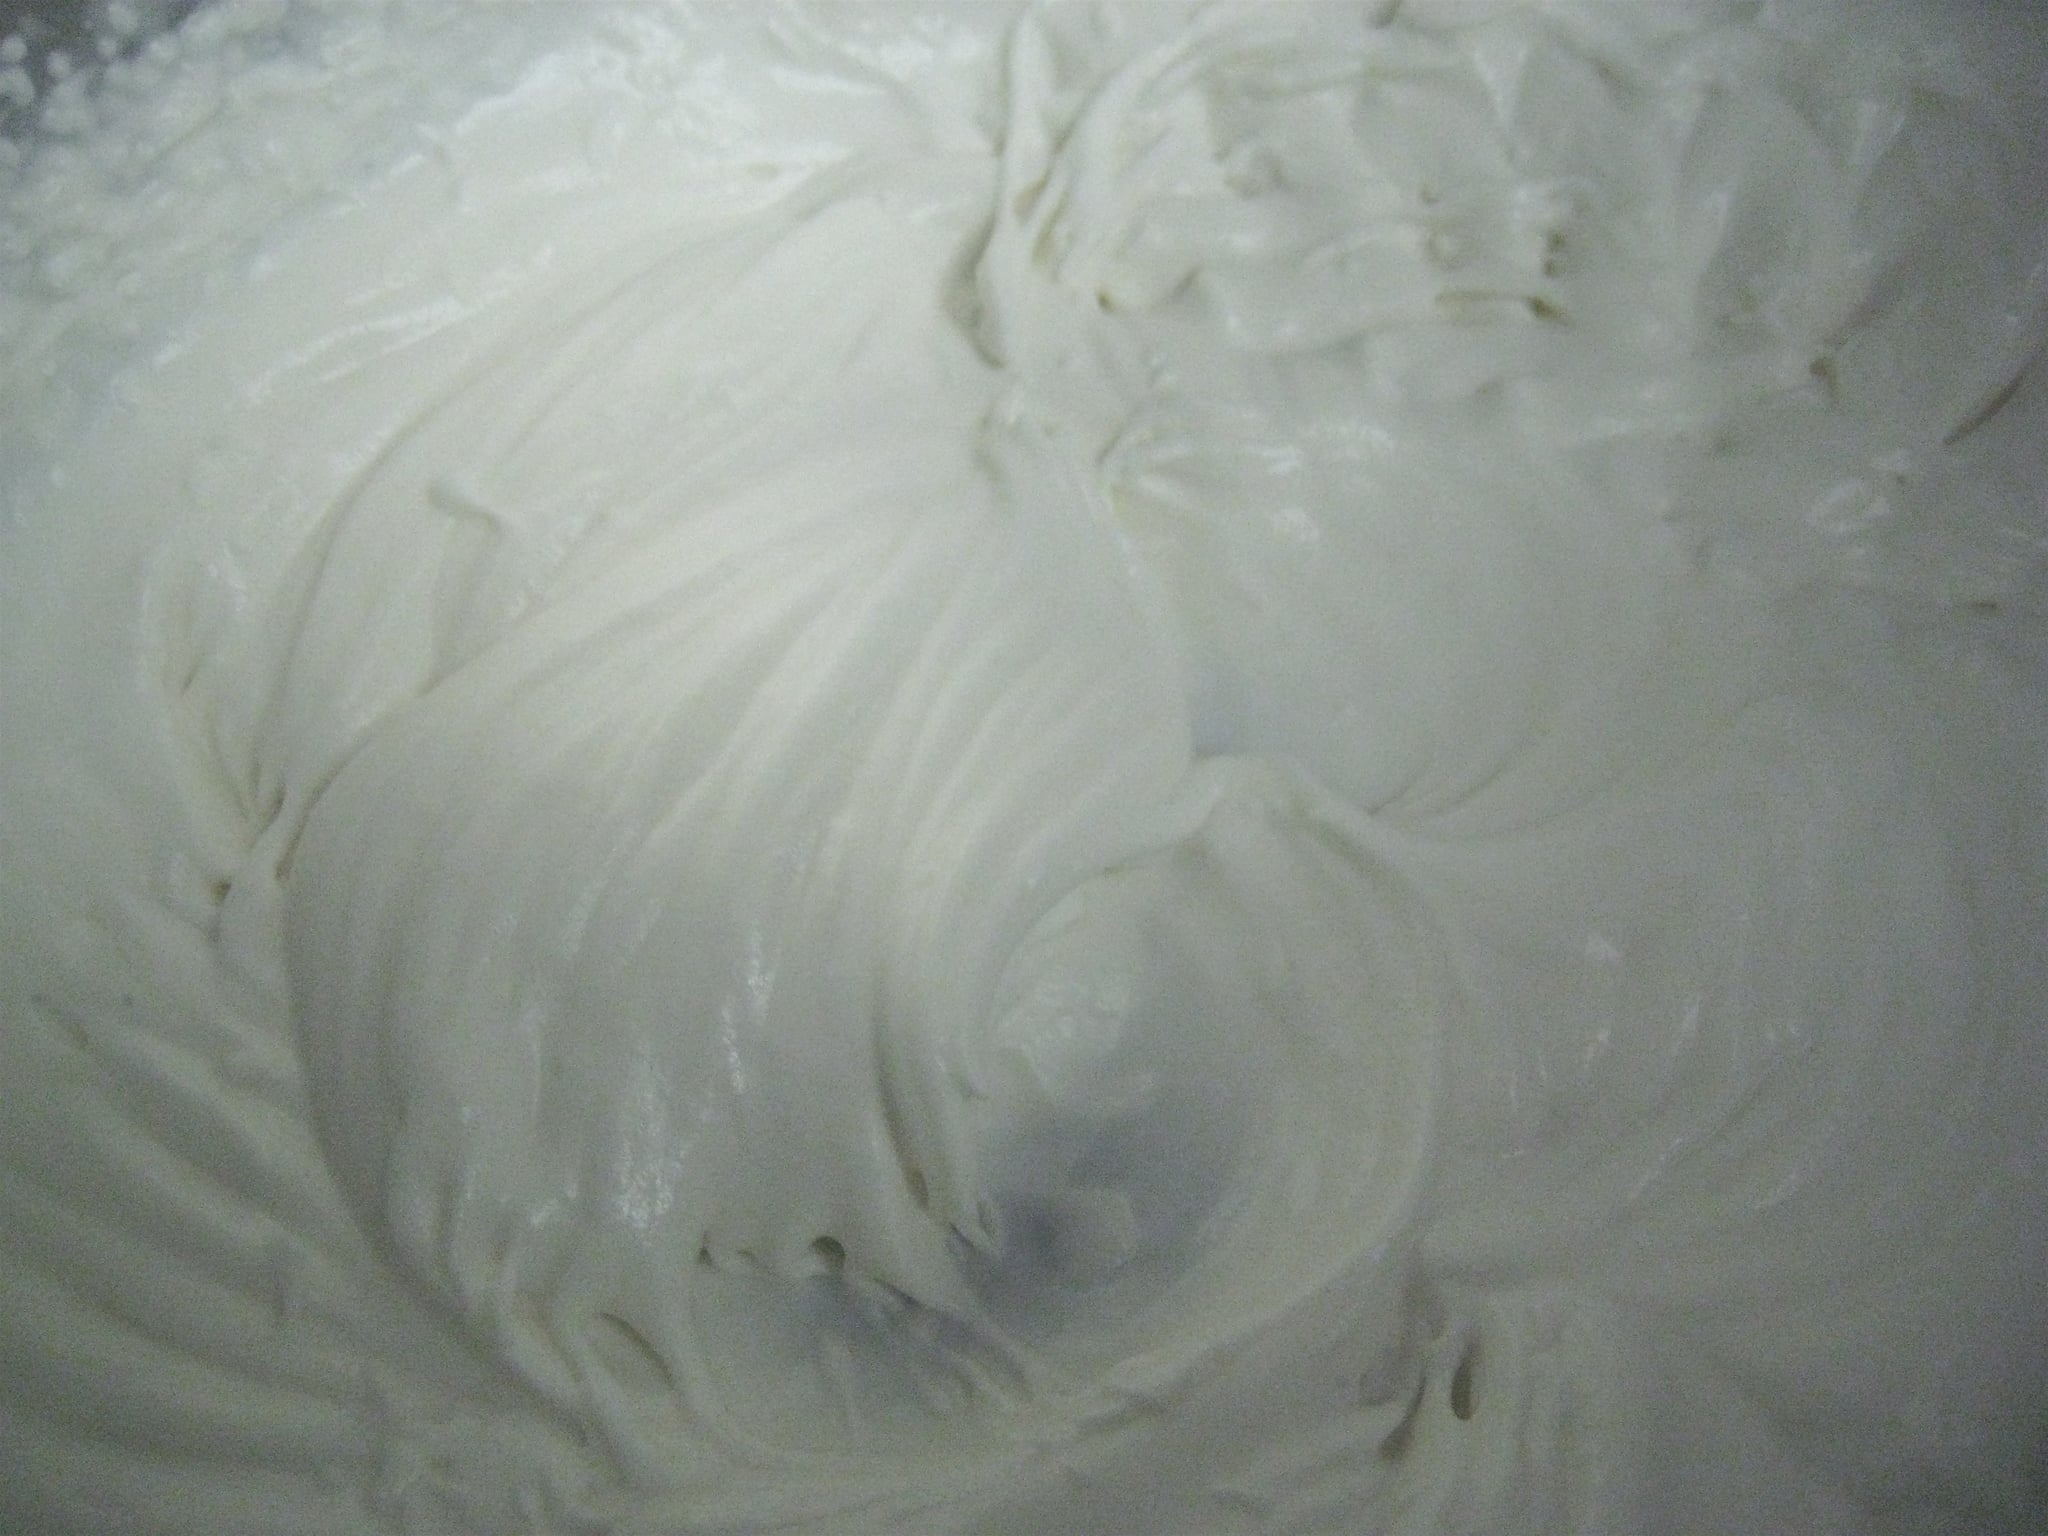 I should have doubled the amount of whipping cream!